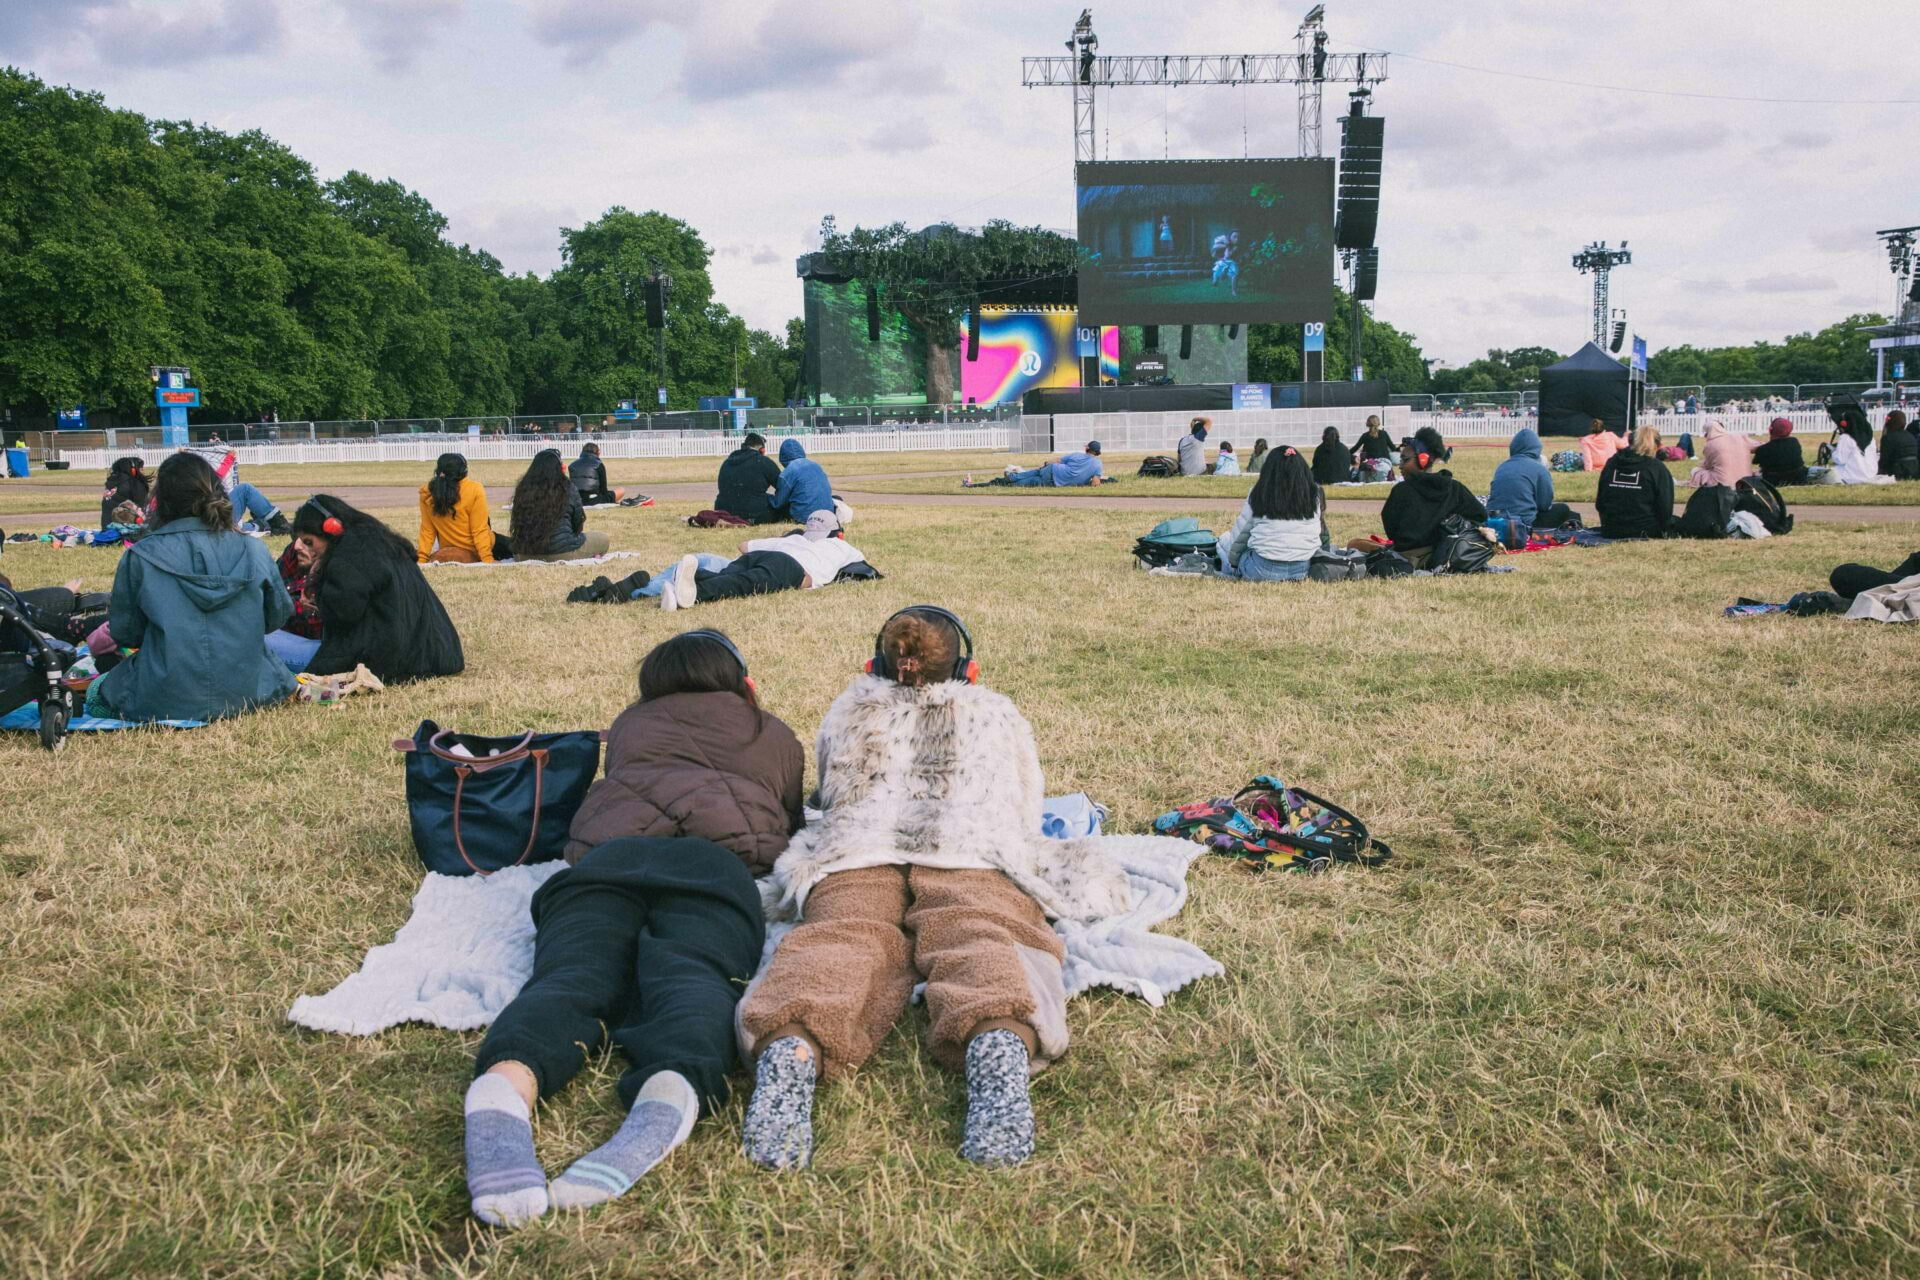 British Summertime Festival Hyde Park is back for another season of music